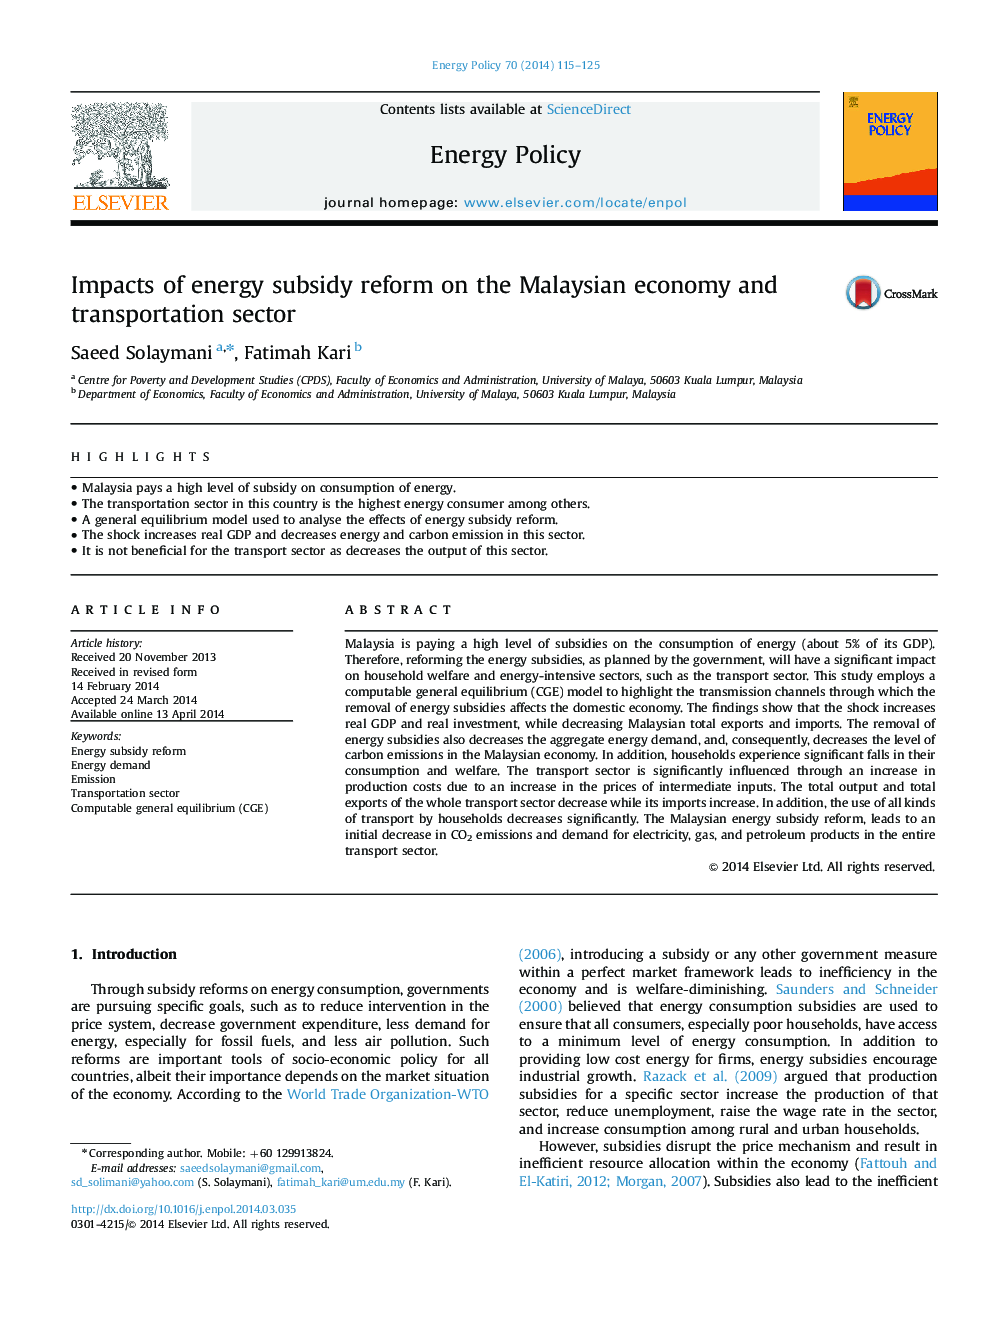 Impacts of energy subsidy reform on the Malaysian economy and transportation sector